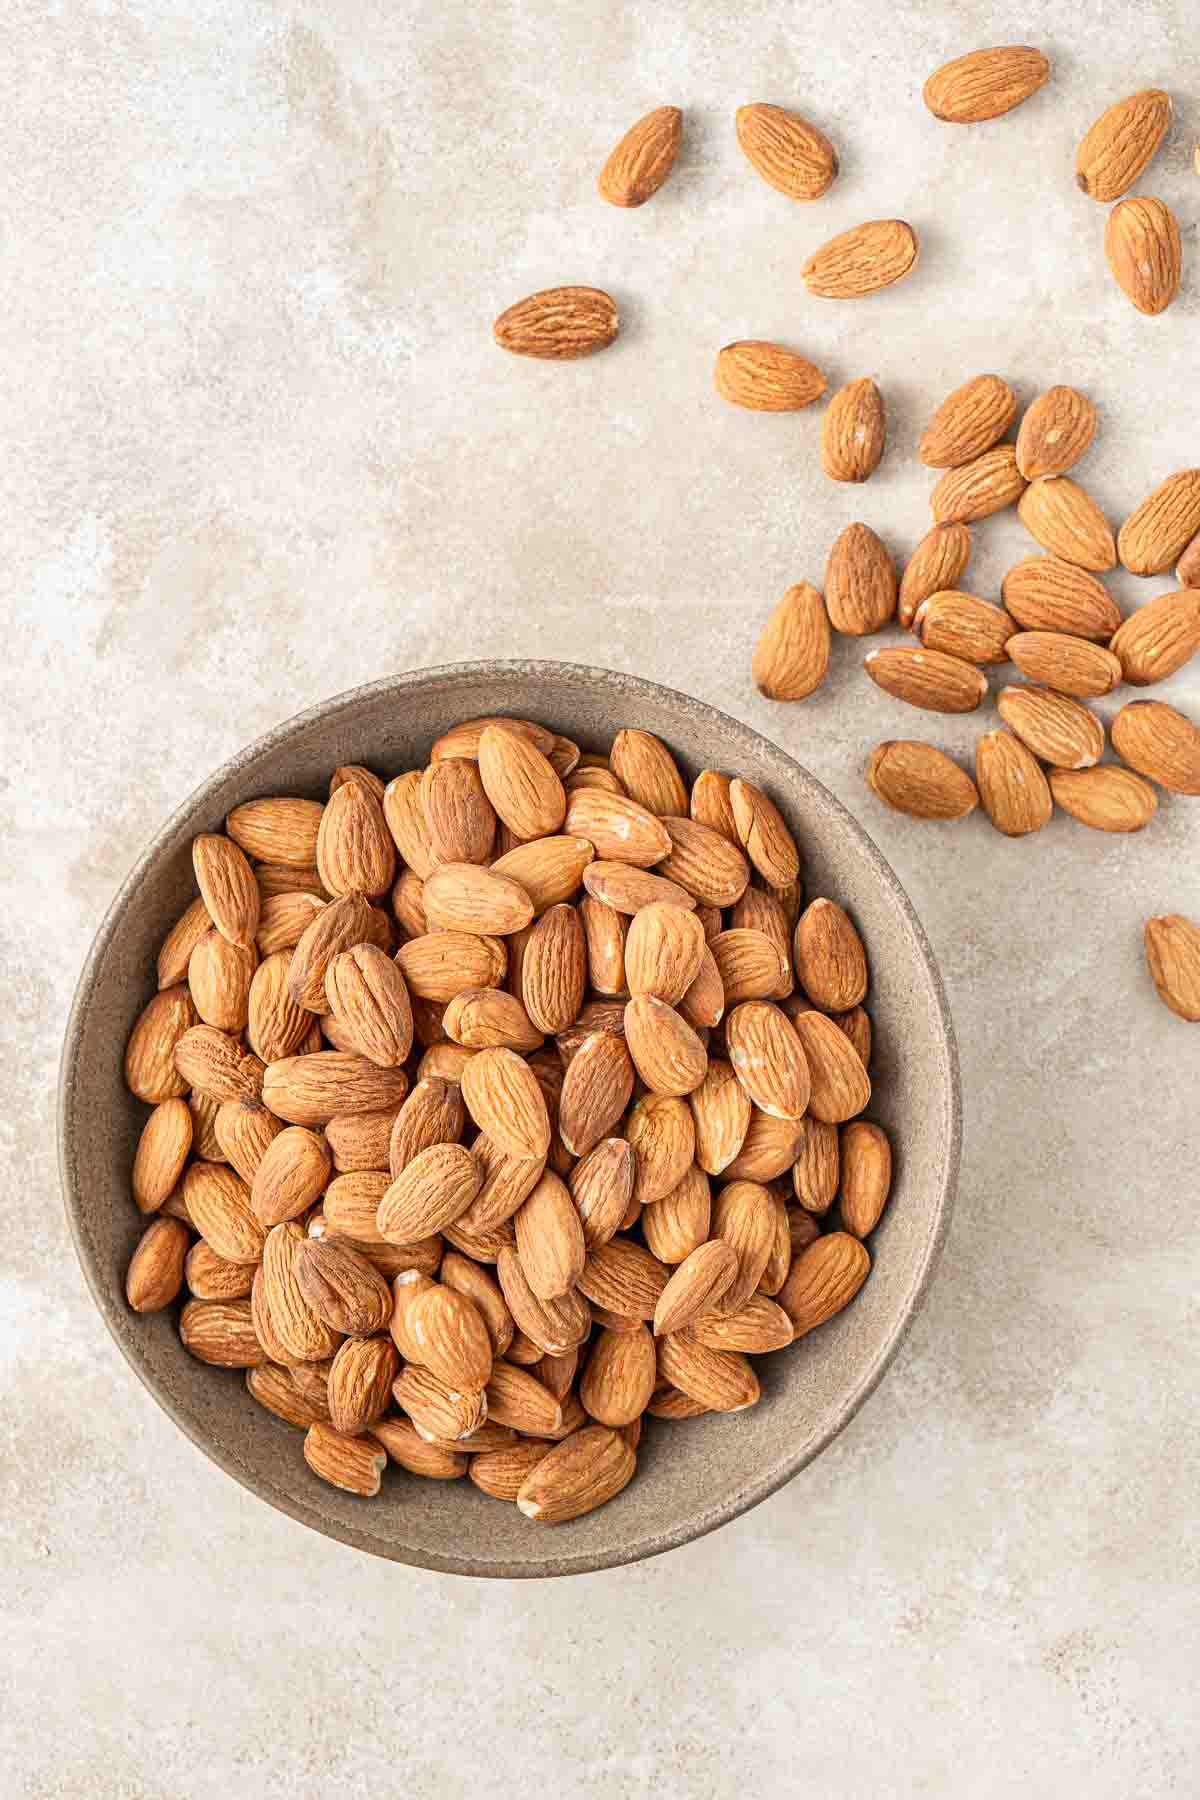 Whole almonds in a bowl.